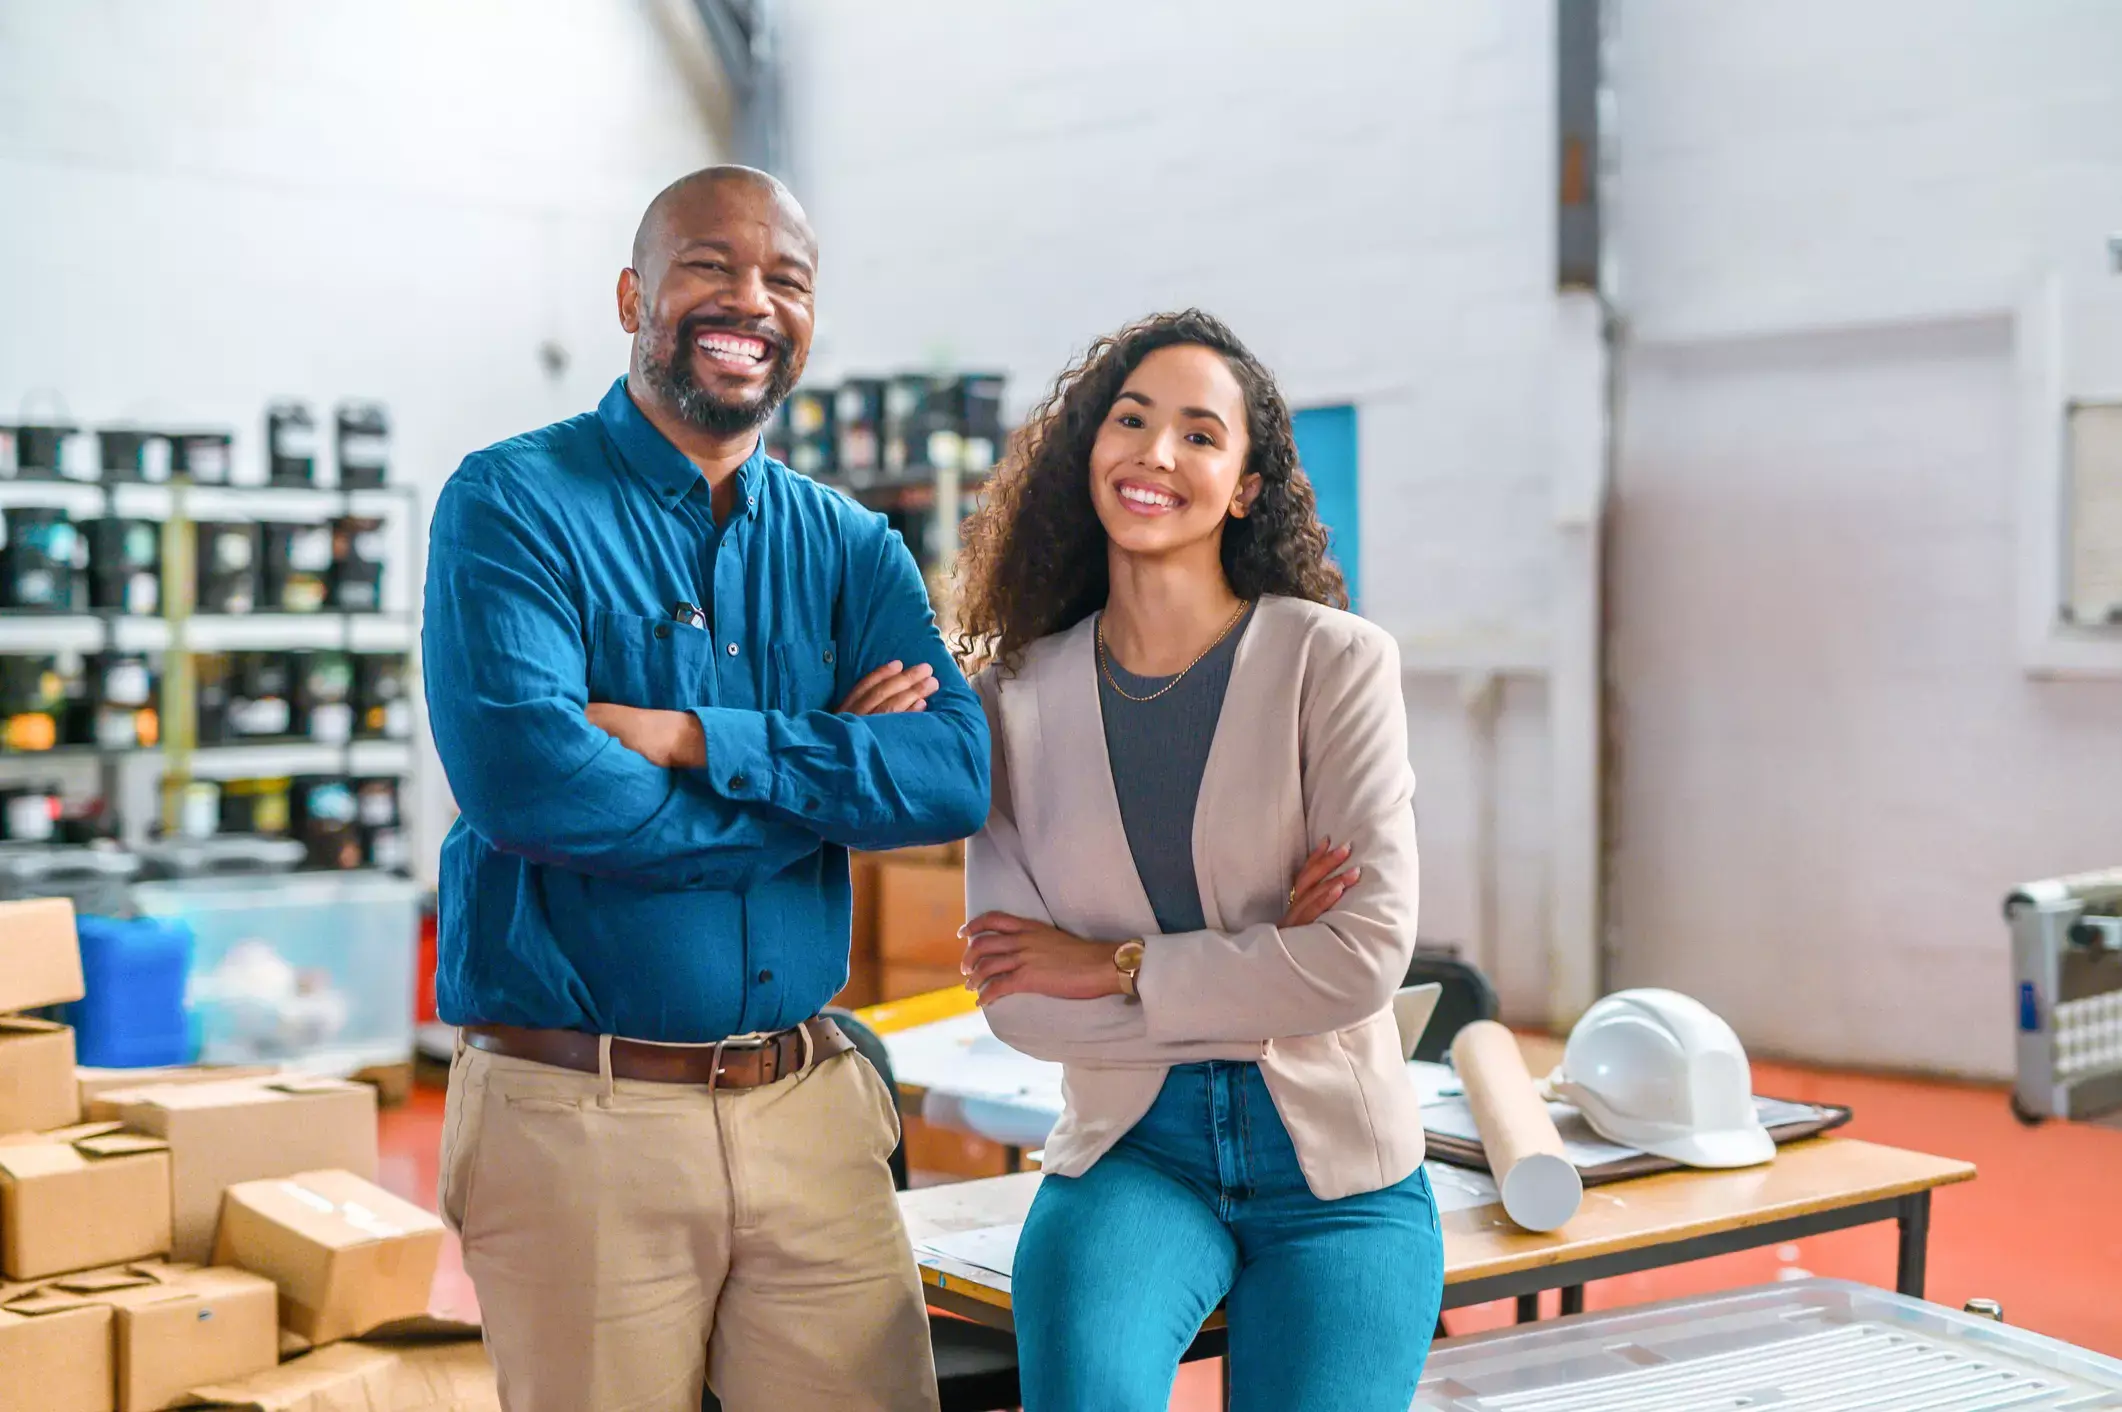 Smiling African-American man and Hispanic woman, business partners, standing confidently in warehouse with supplies and equipment.